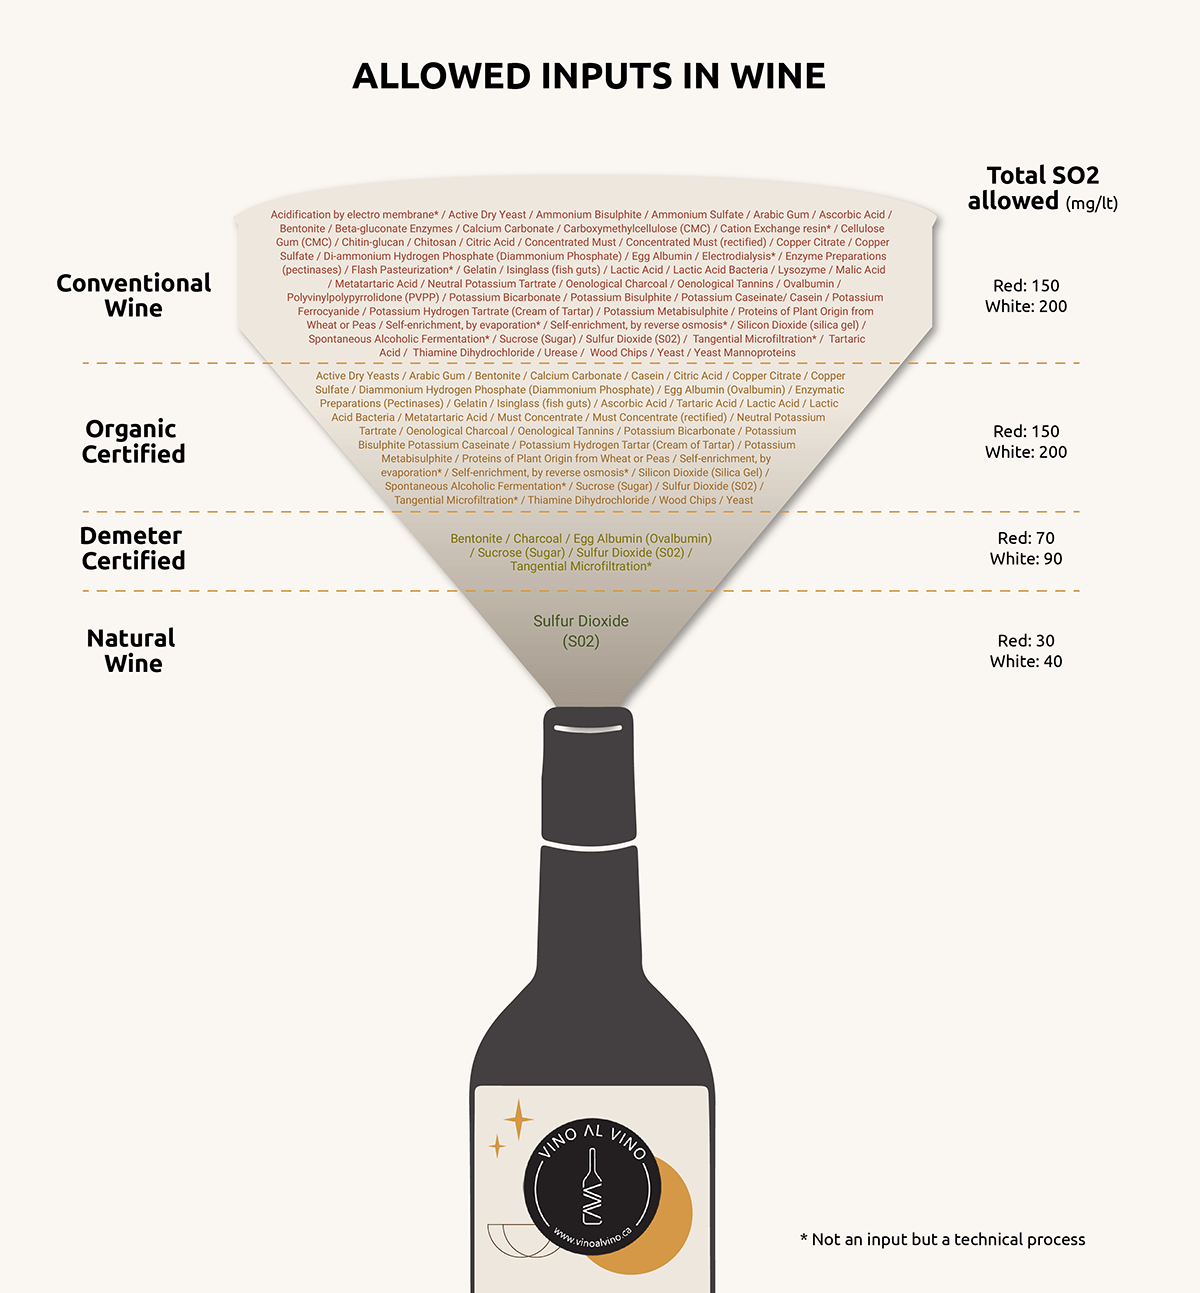 What are the allowed inputs in wine?